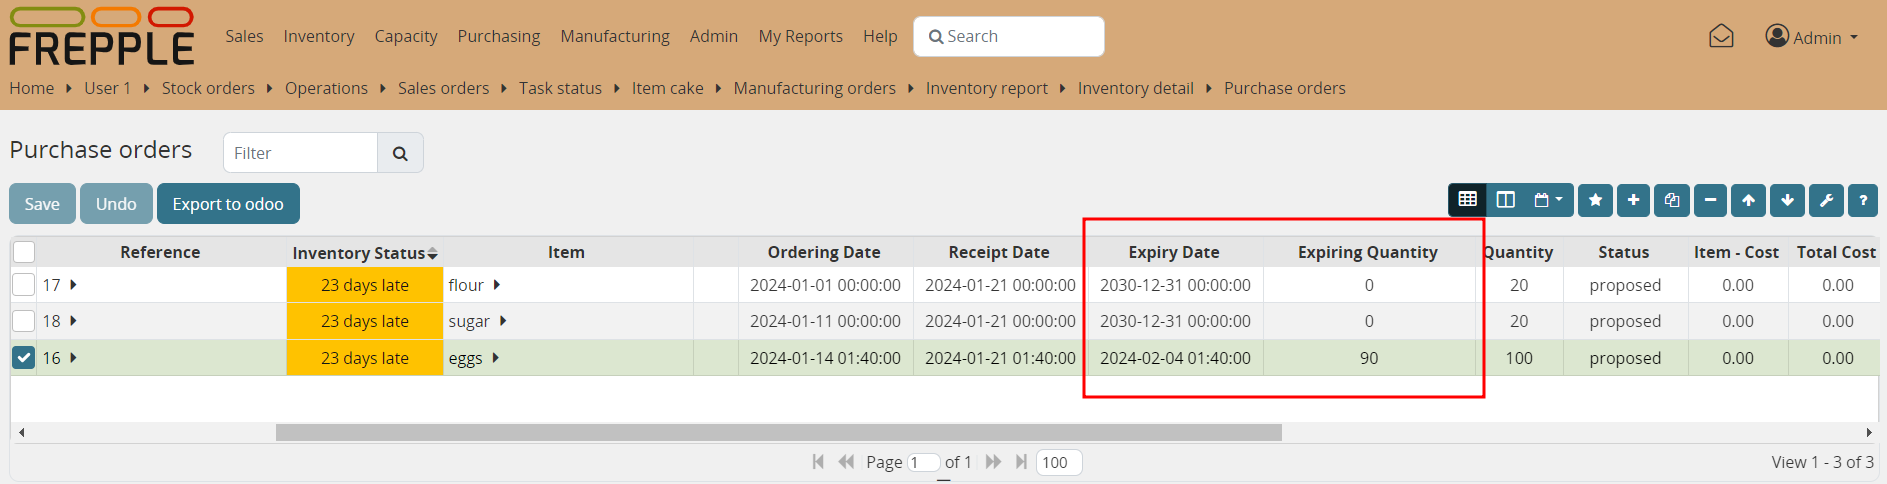 Purchase orders with expiry date and expiring quantity